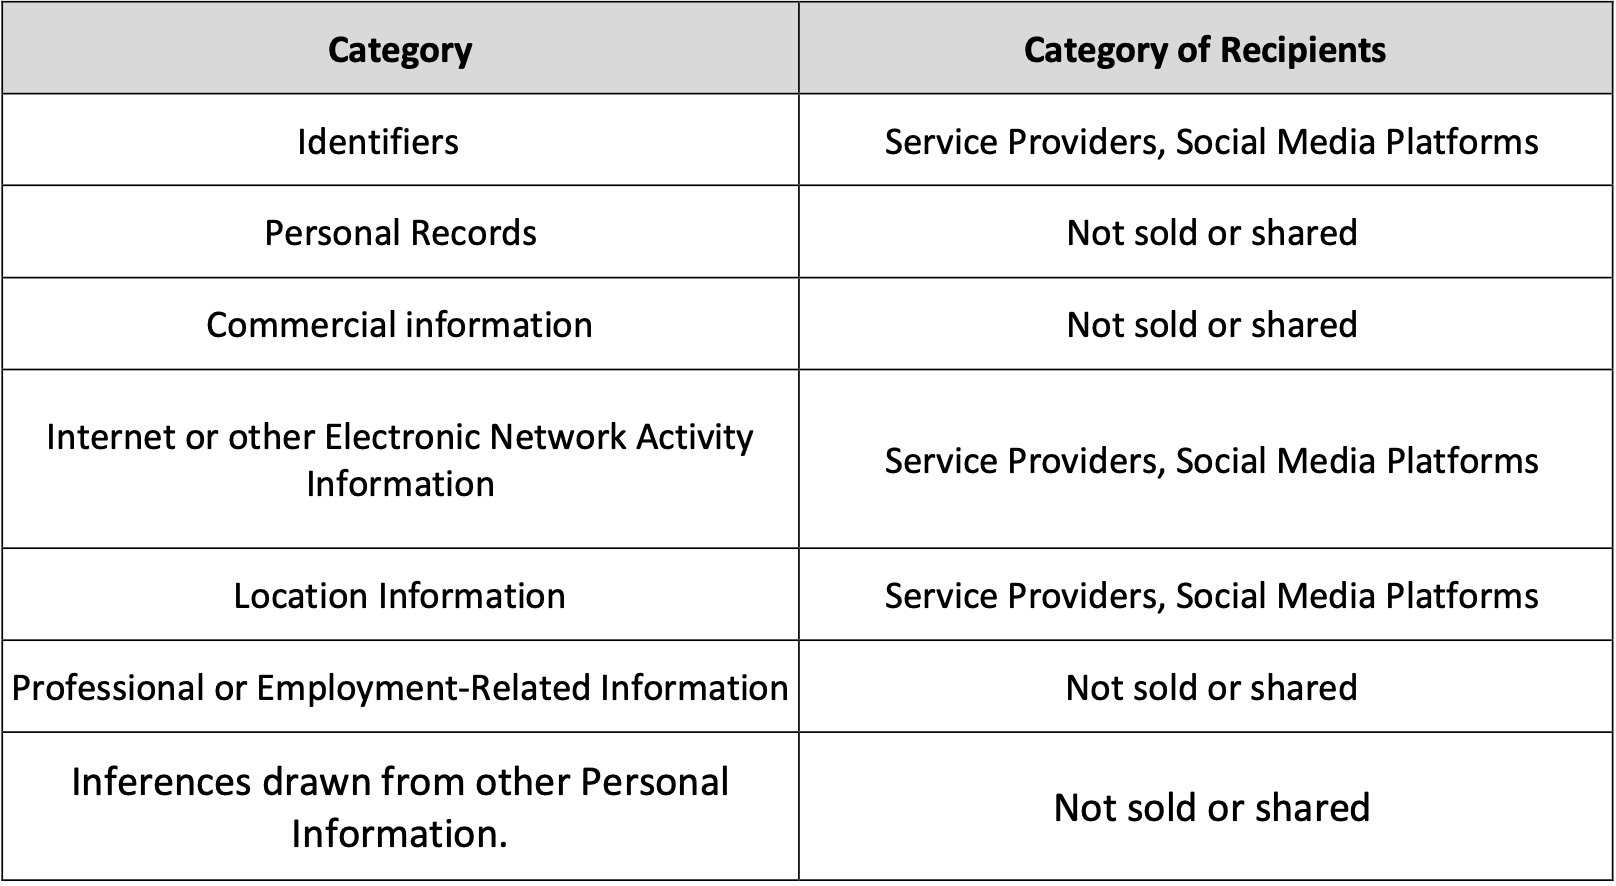 categories of personal information sold or shared